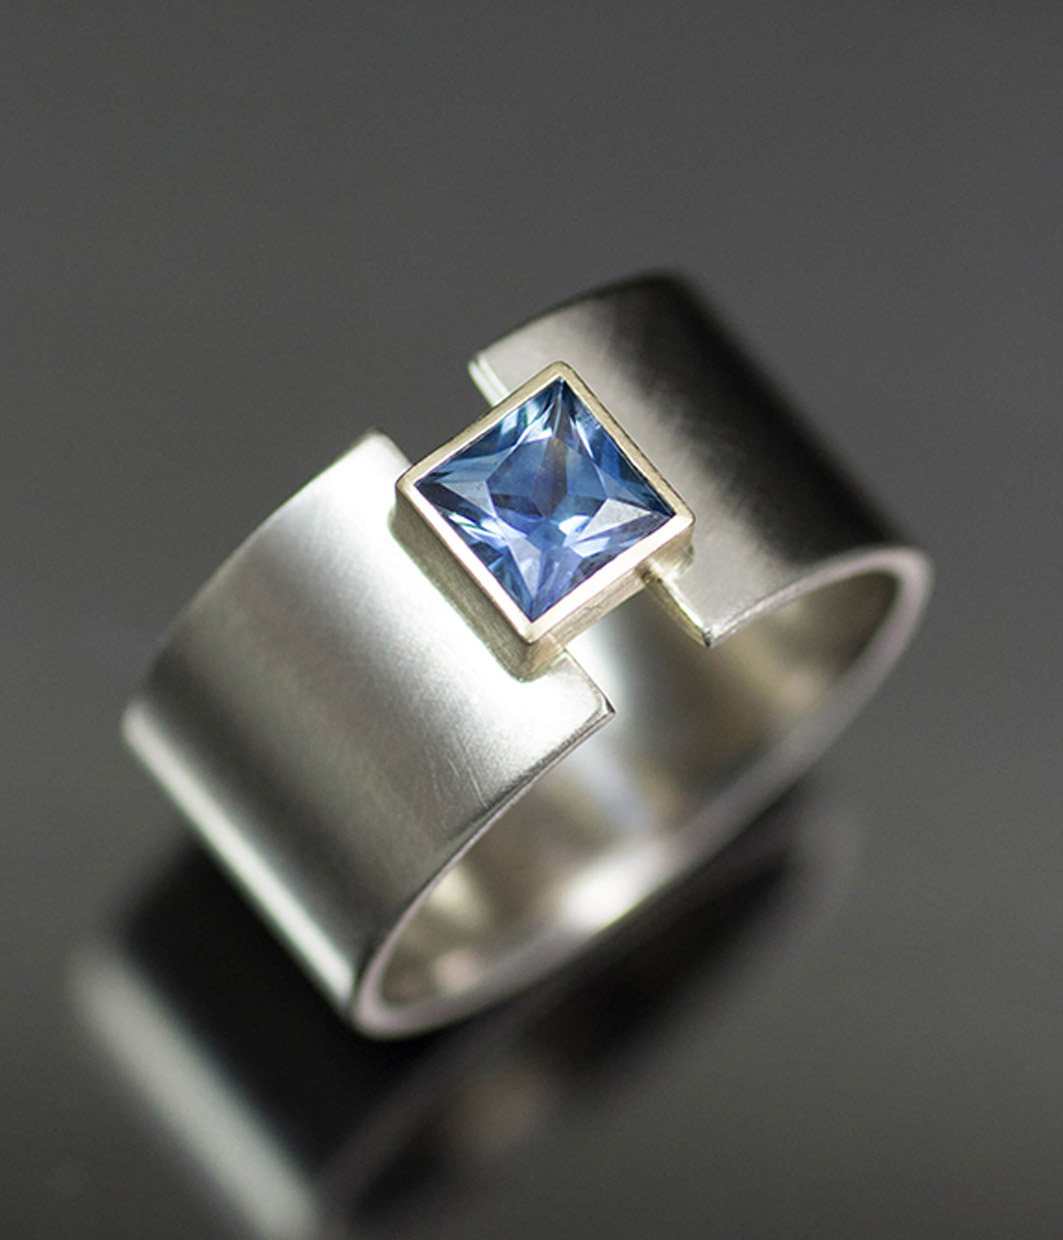 Lolide Seattle USA is a lesbian, gay, queer LGBTQIA+ wedding and engagement jeweler crafting this square lunar eclipse montana sapphire ring